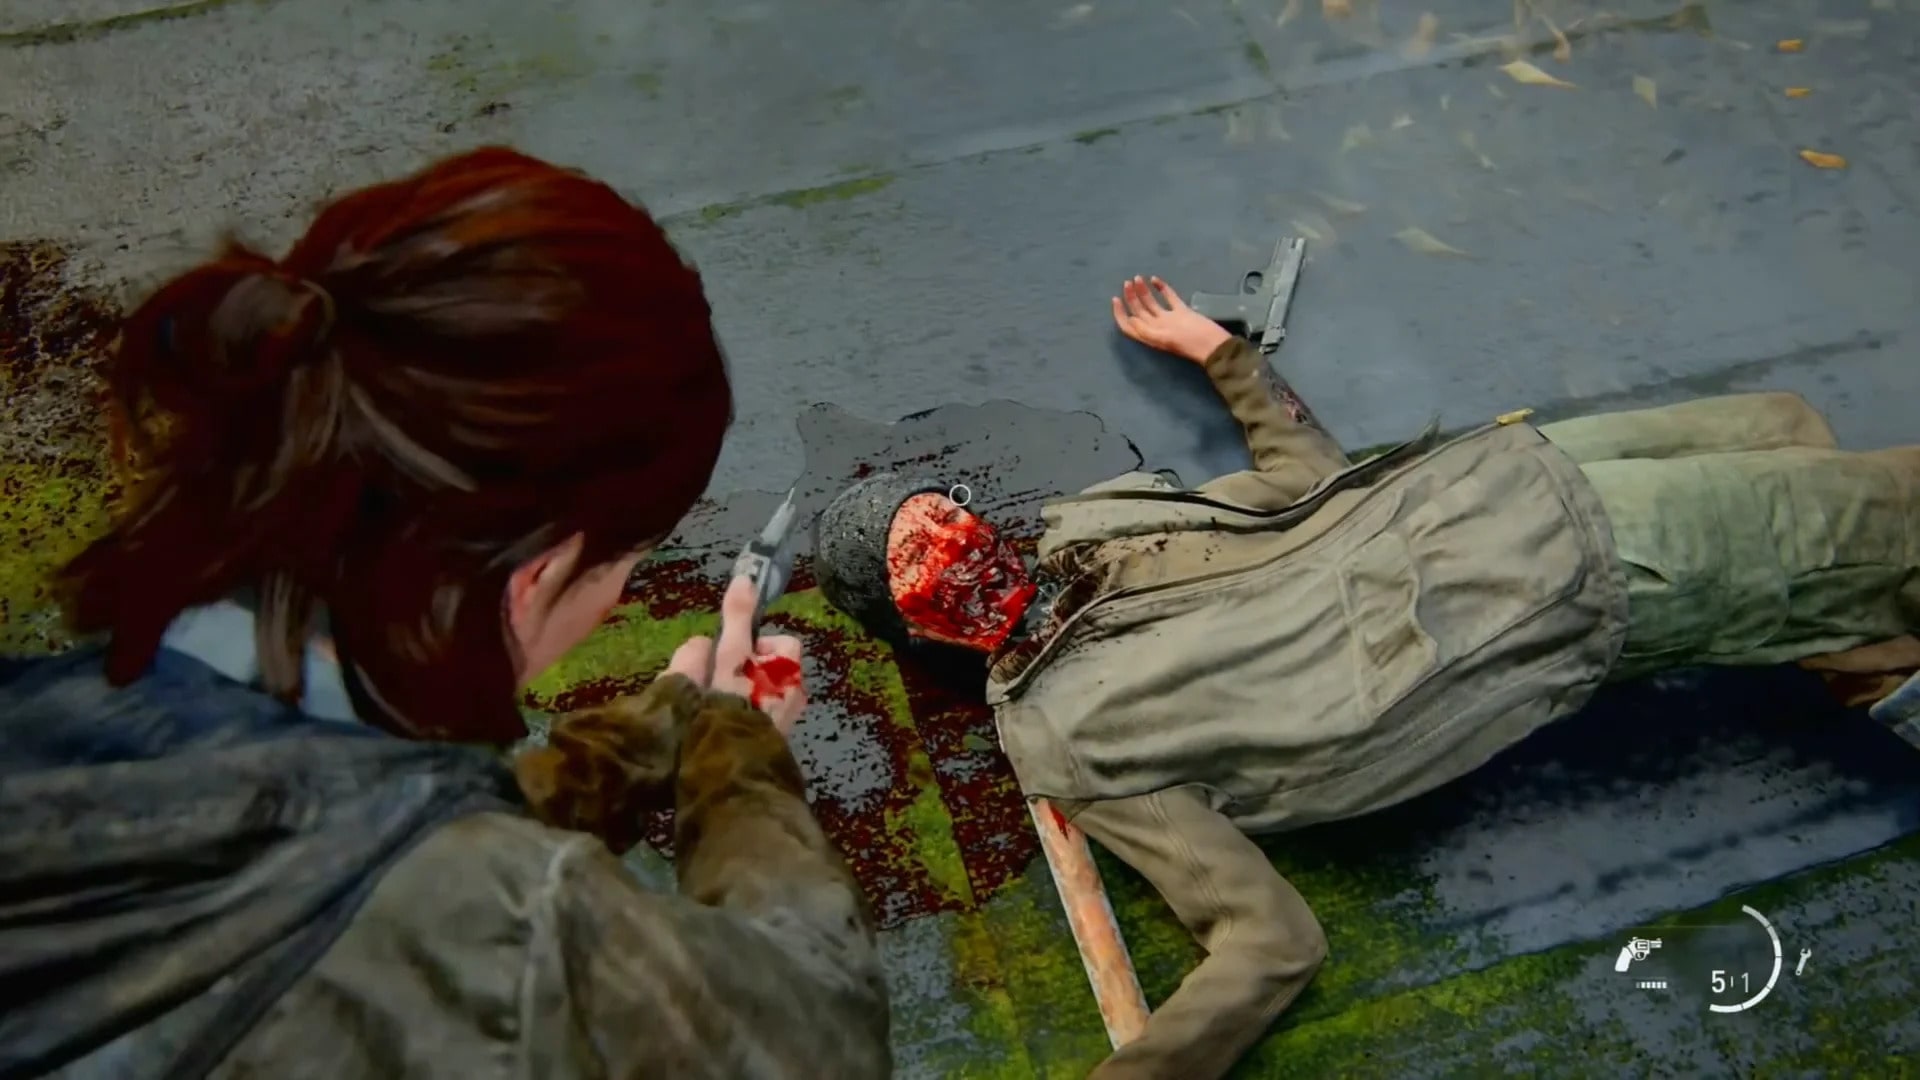 The Last of Us Part 2 does not hesitate to get bloody and extreme.